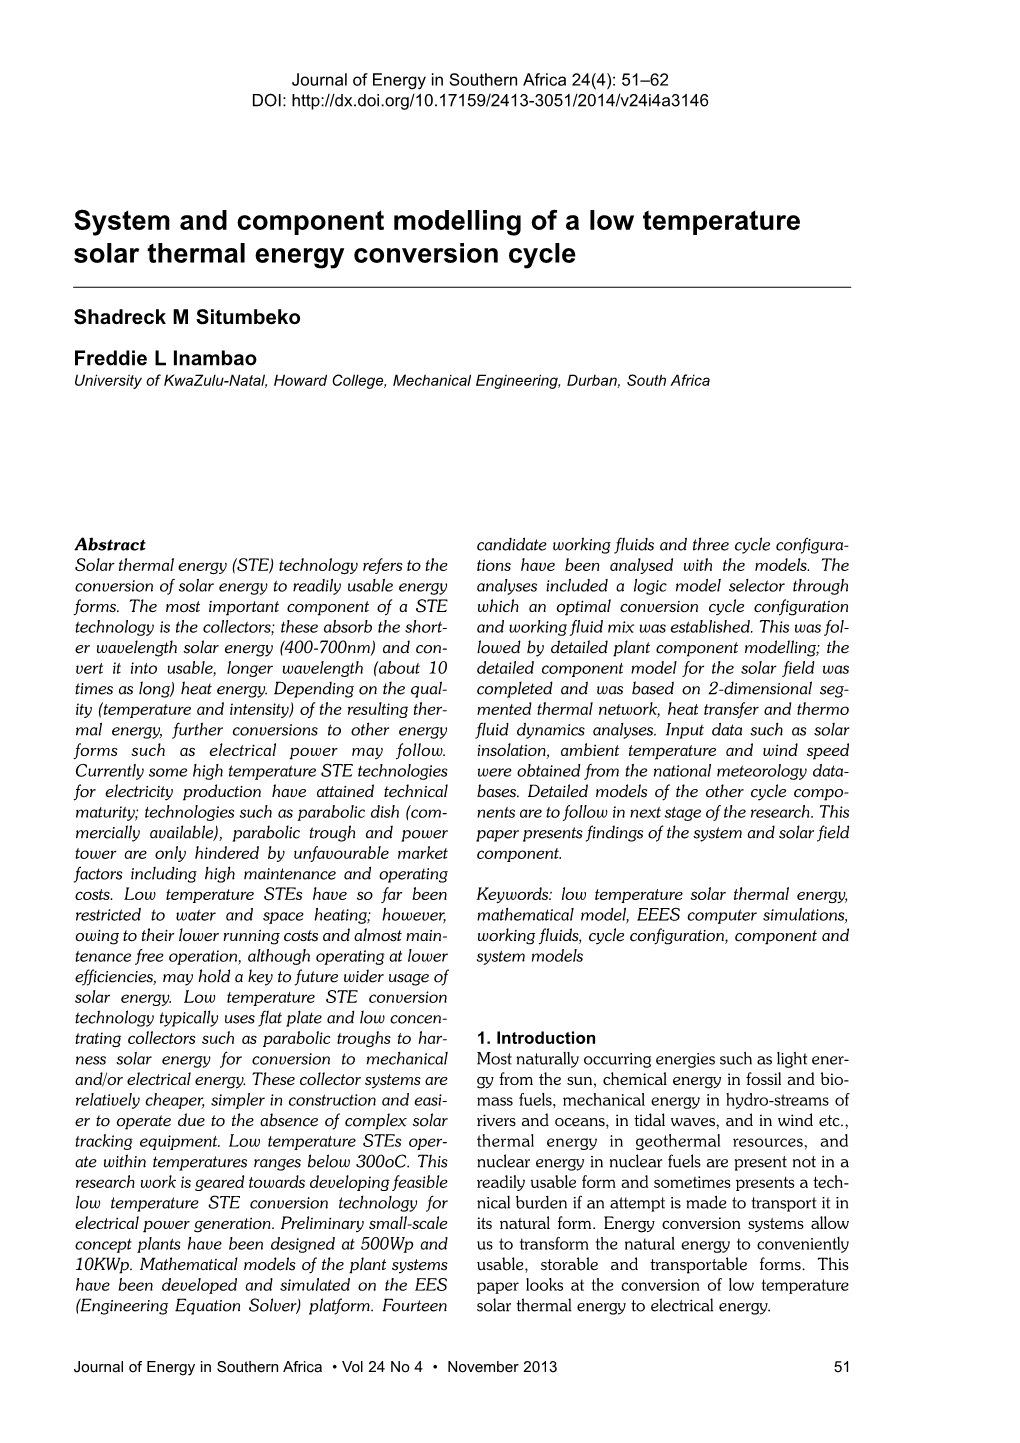 System and Component Modelling of a Low Temperature Solar Thermal Energy Conversion Cycle